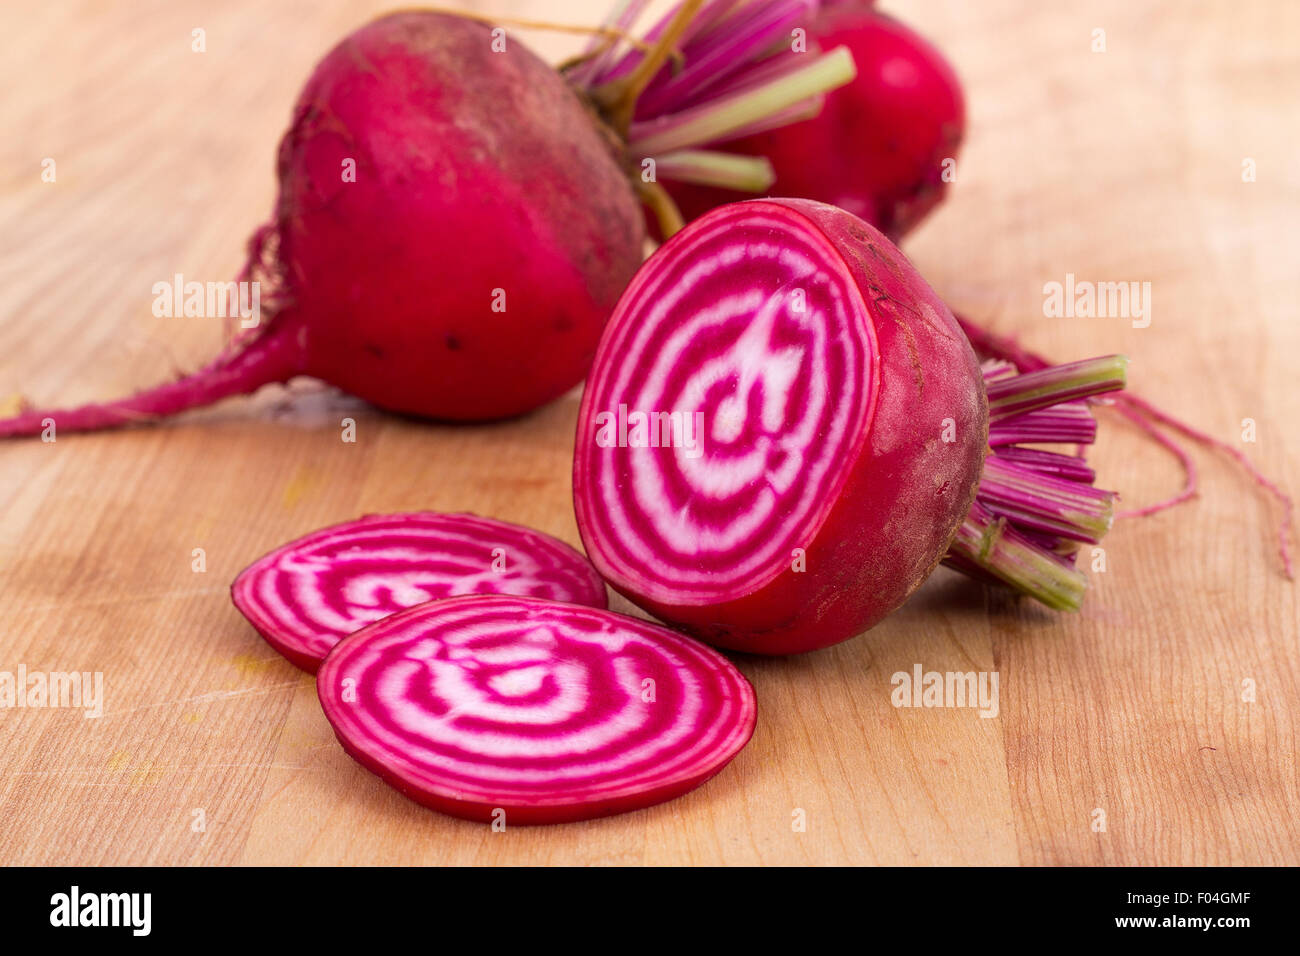 Chioggia striped or candy stripe beet  whole and sliced on wood table Stock Photo